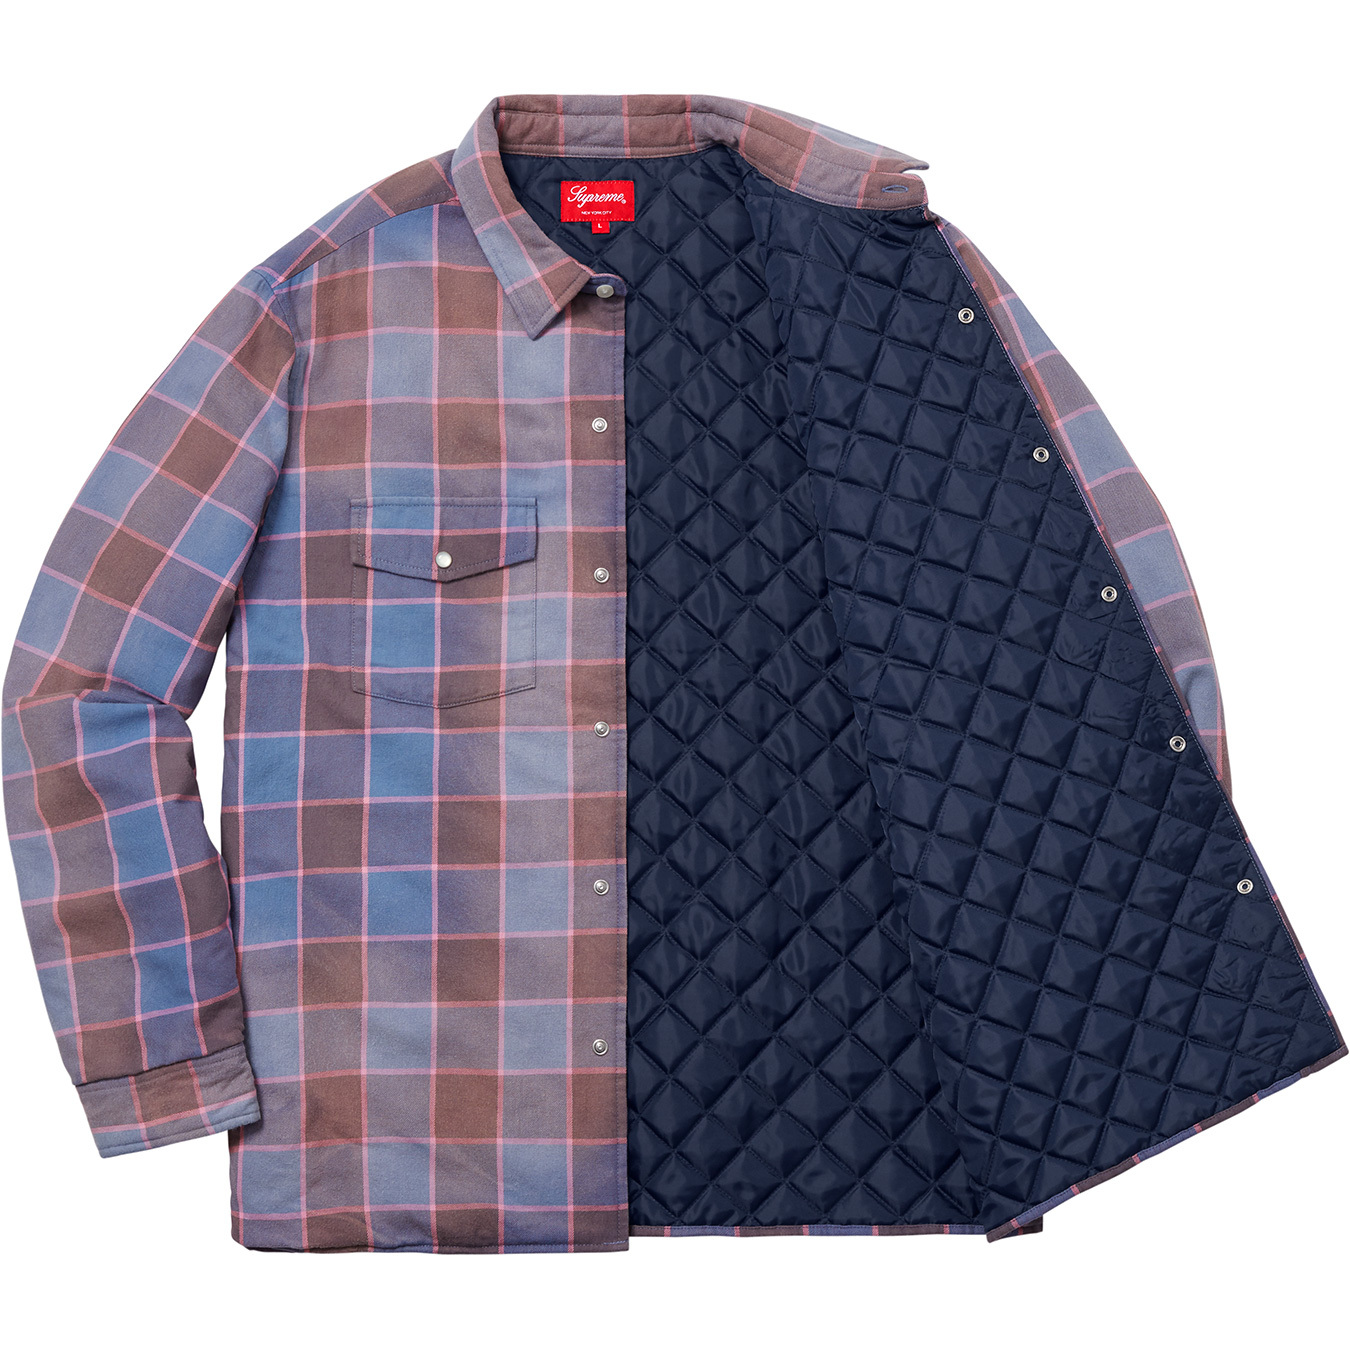 Quilted Faded Plaid Shirt - Supreme Community